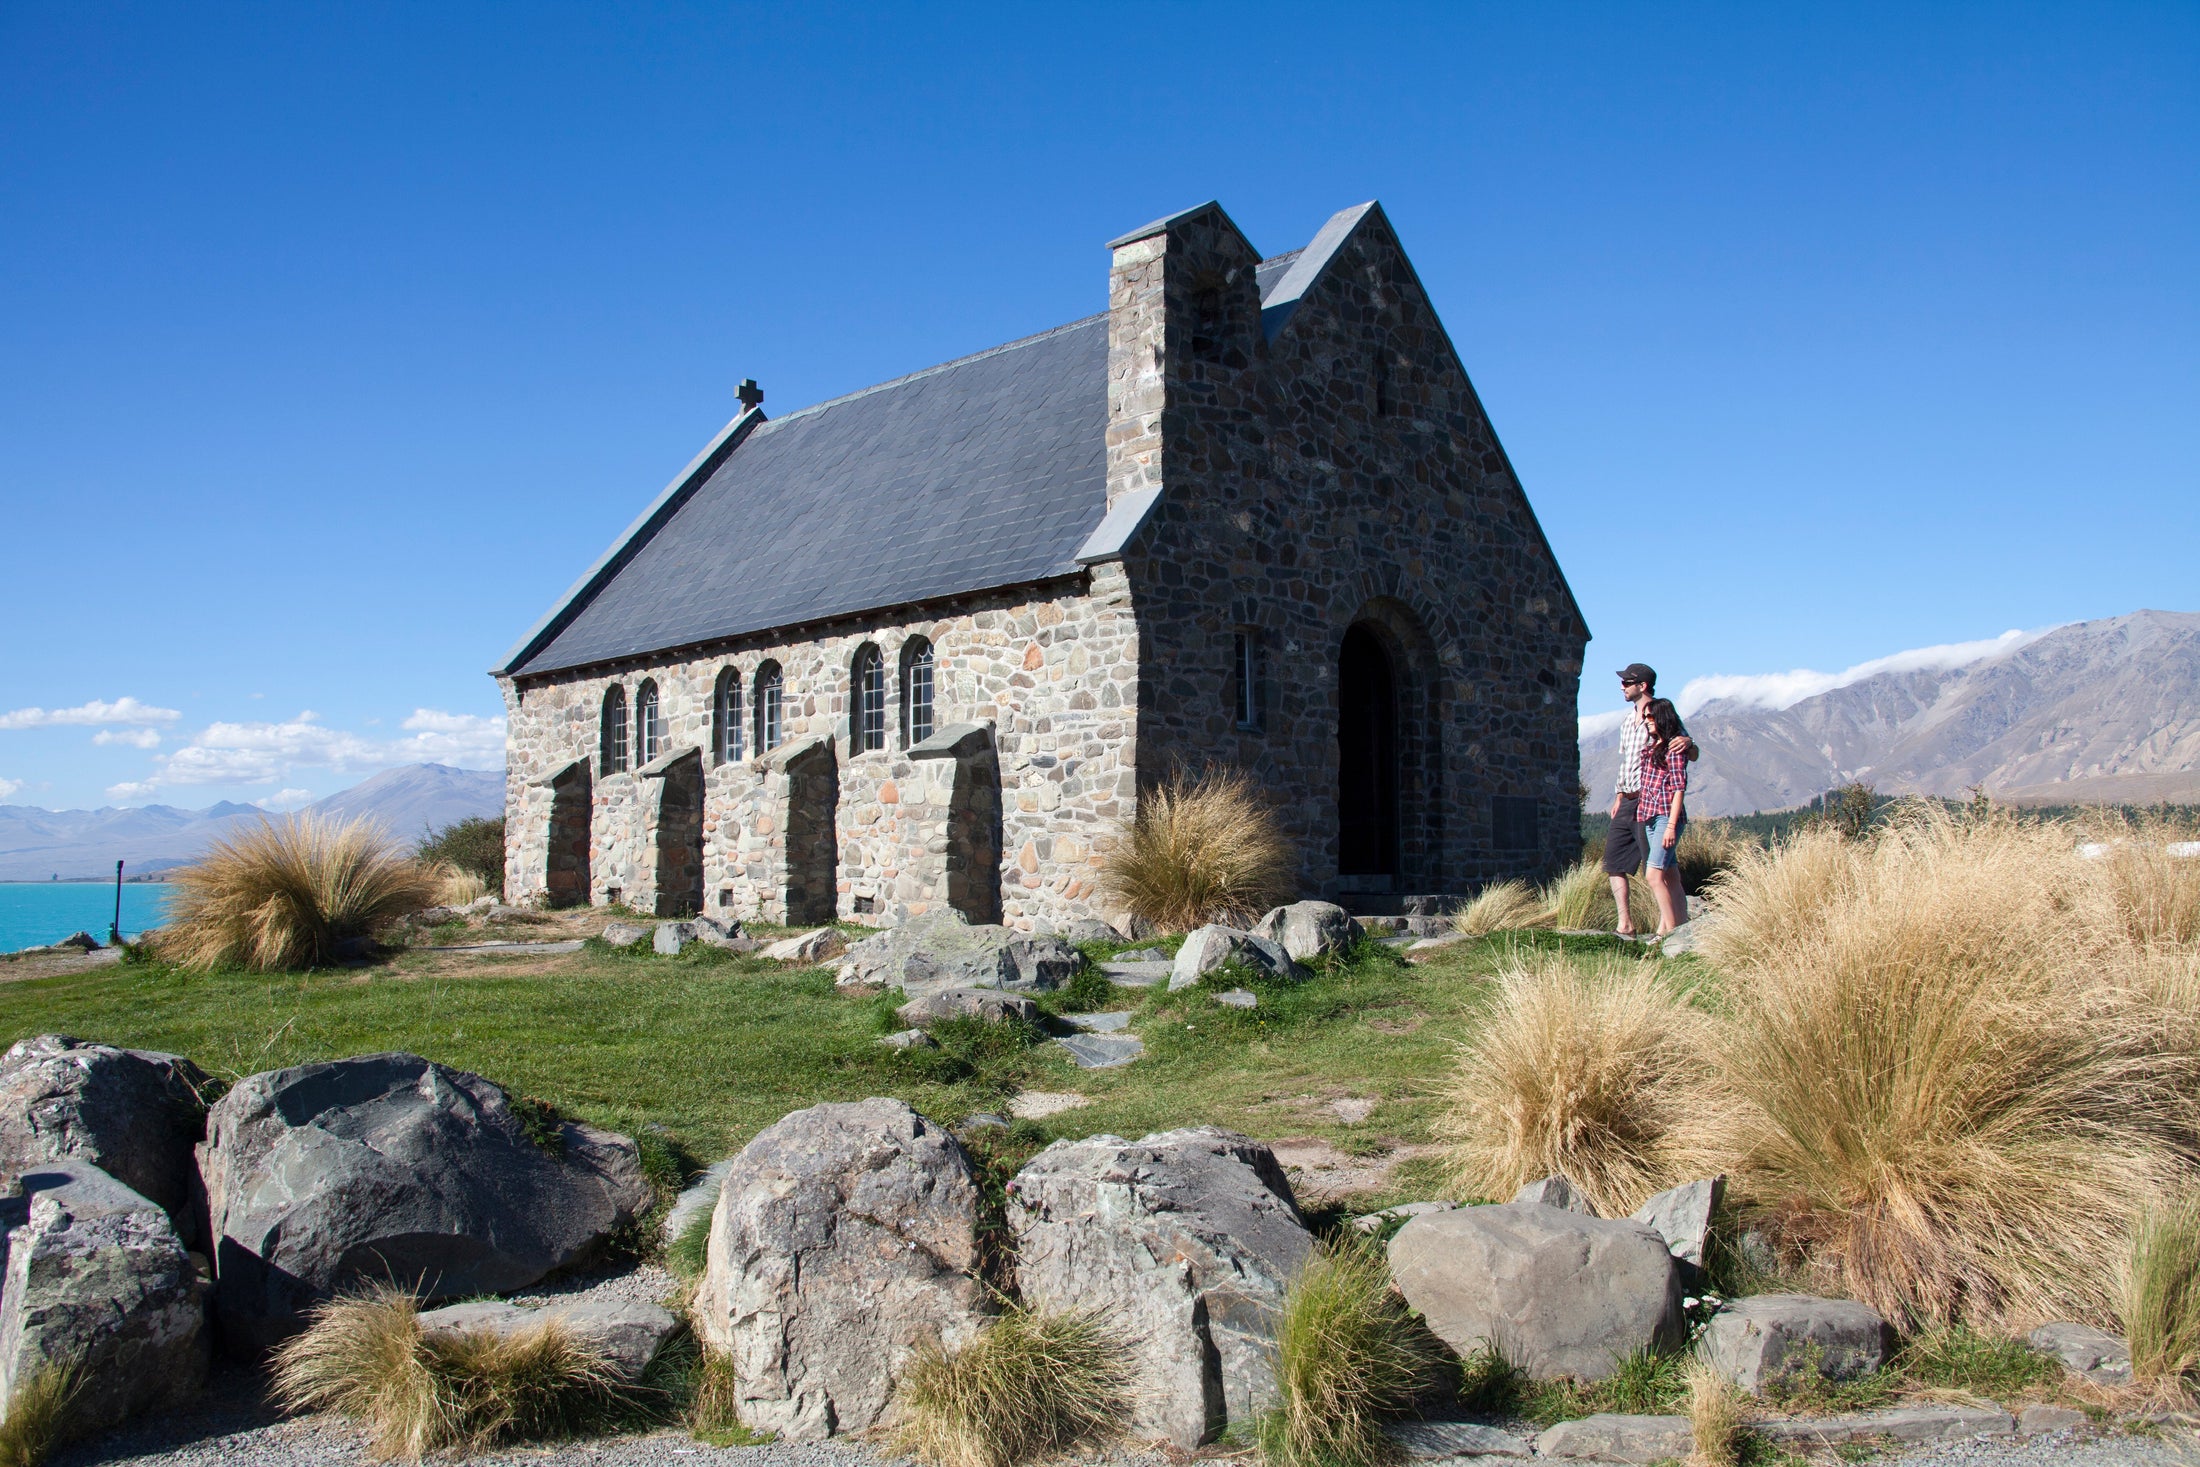 Queenstown to Christchurch via Mt Cook:  Private Three Day Tour